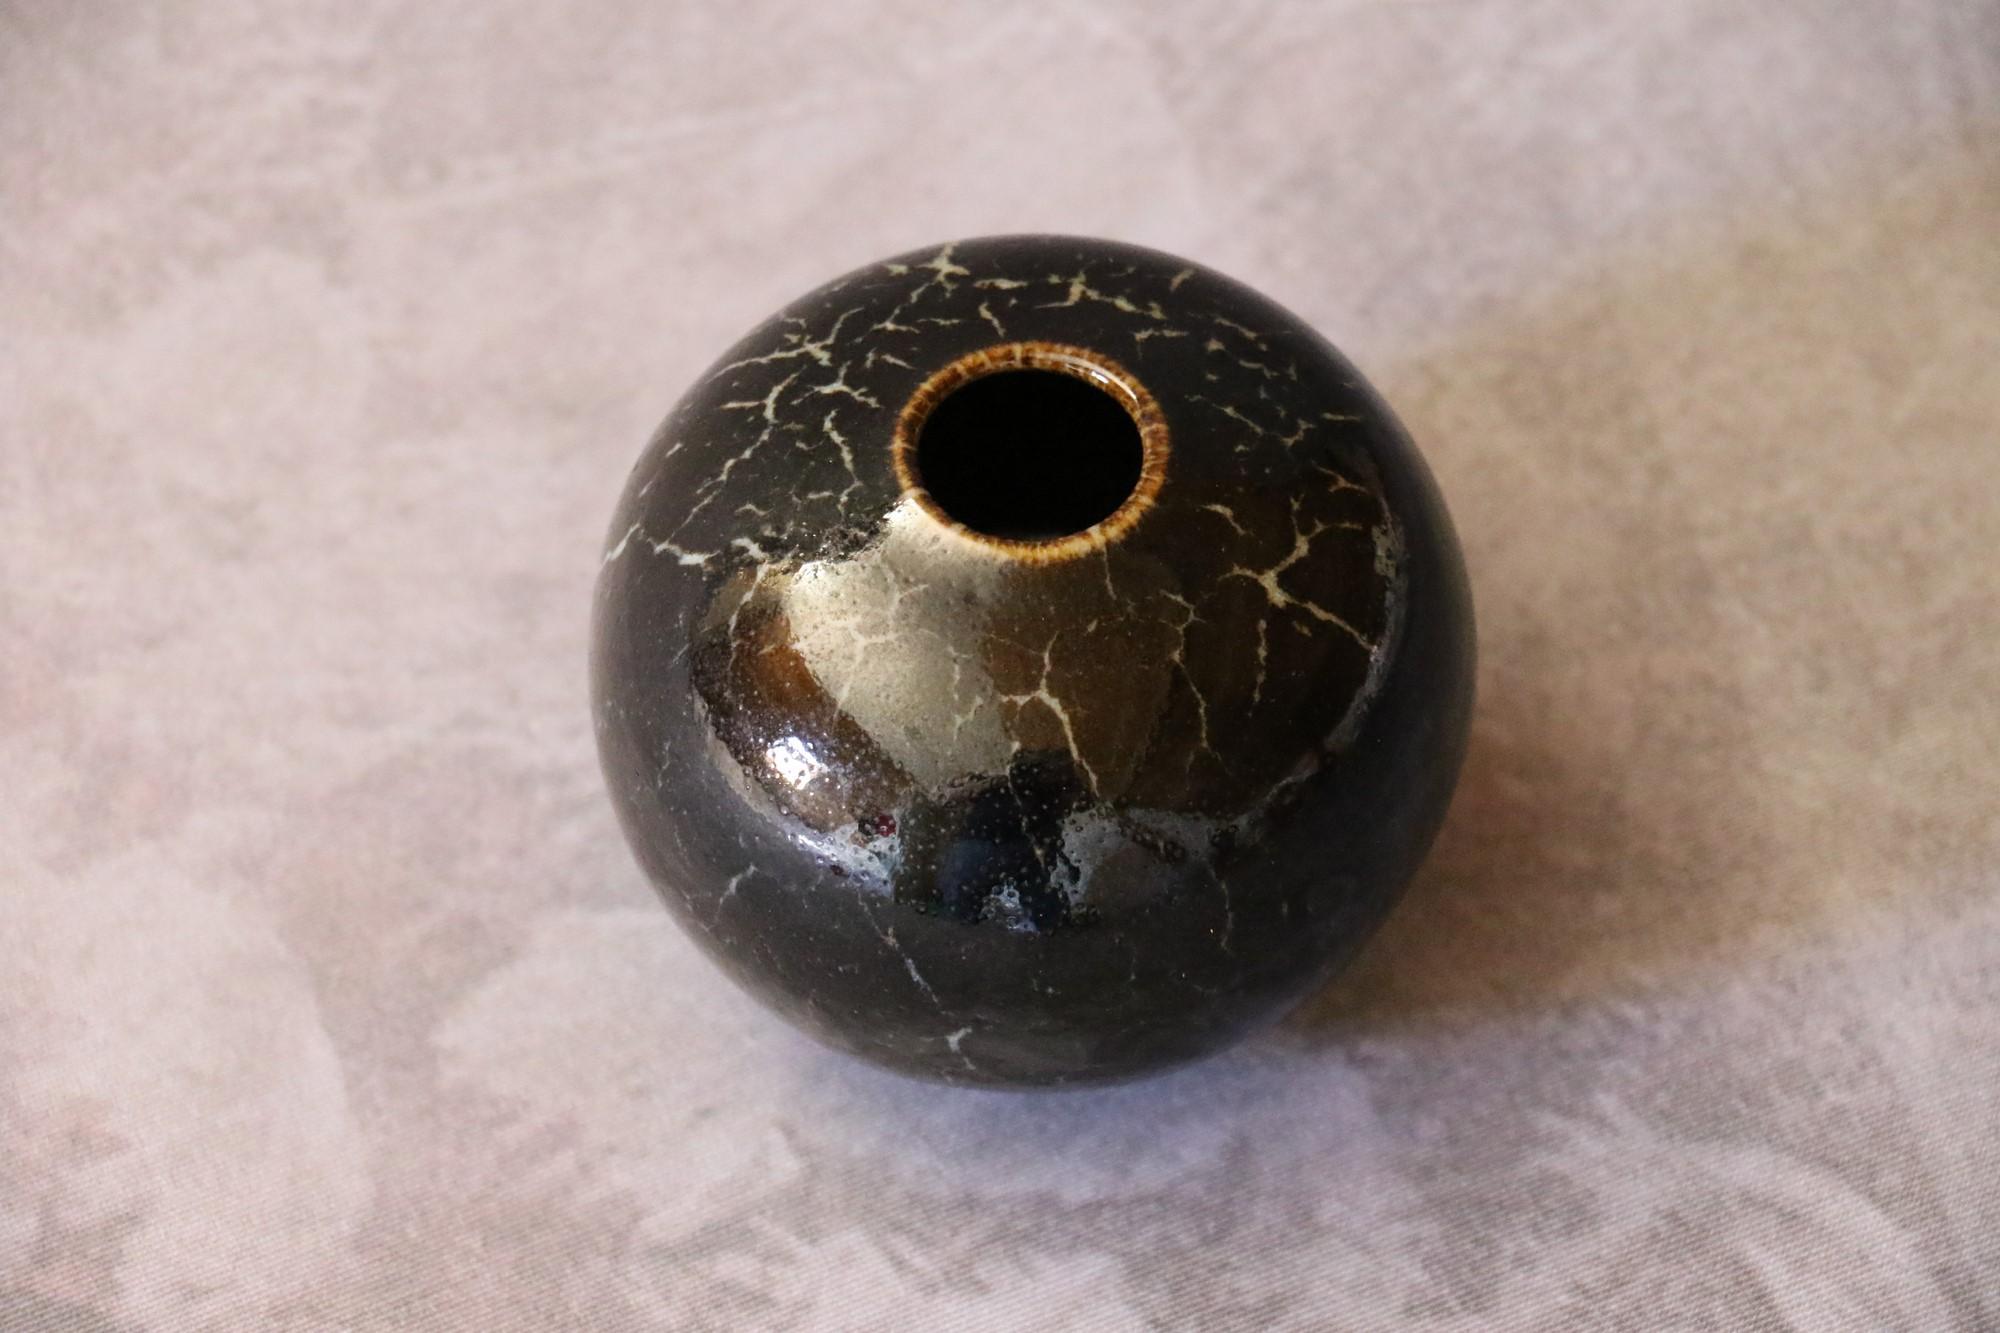 Mid-Century Modern French Ceramic Black and White Ball Vase by Marc Uzan, circa 2000 For Sale